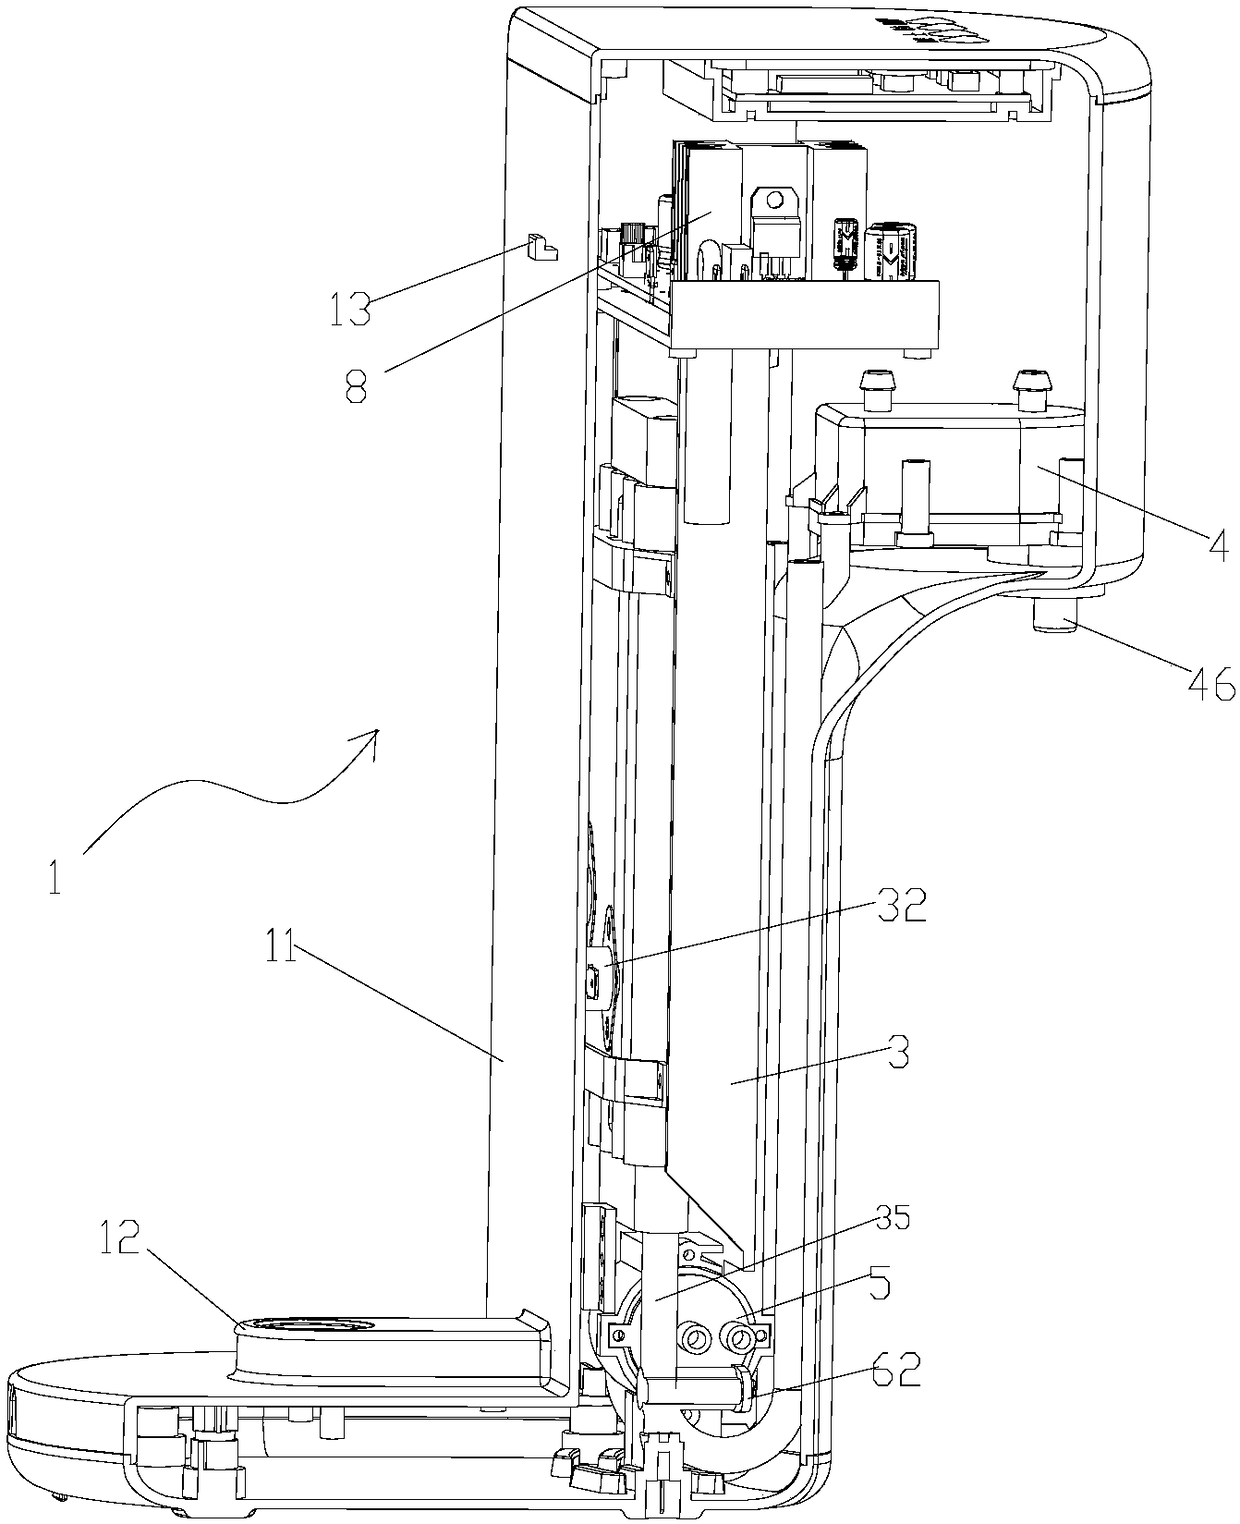 Instant-heating type water dispenser and water vapor separating device thereof